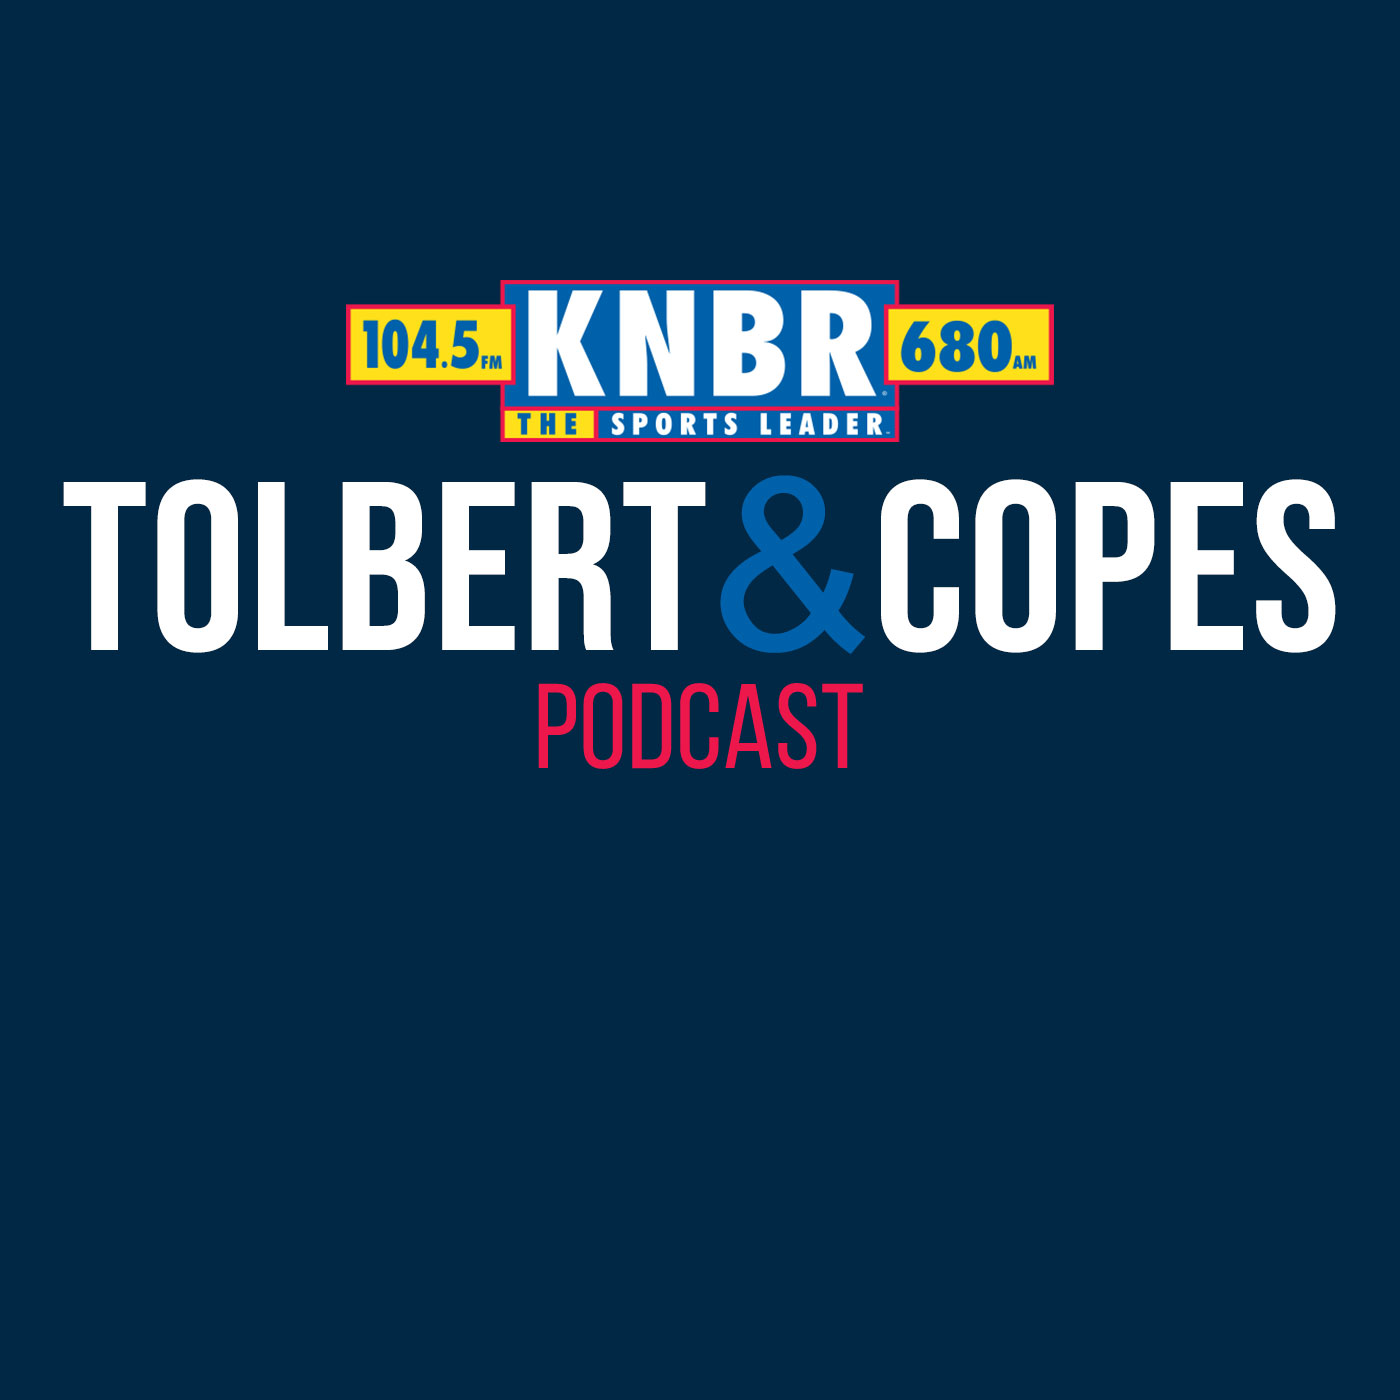 6-12 Tolbert & Copes Hour 1: Remembering the Life of Jerry West & His Impact on the Warriors